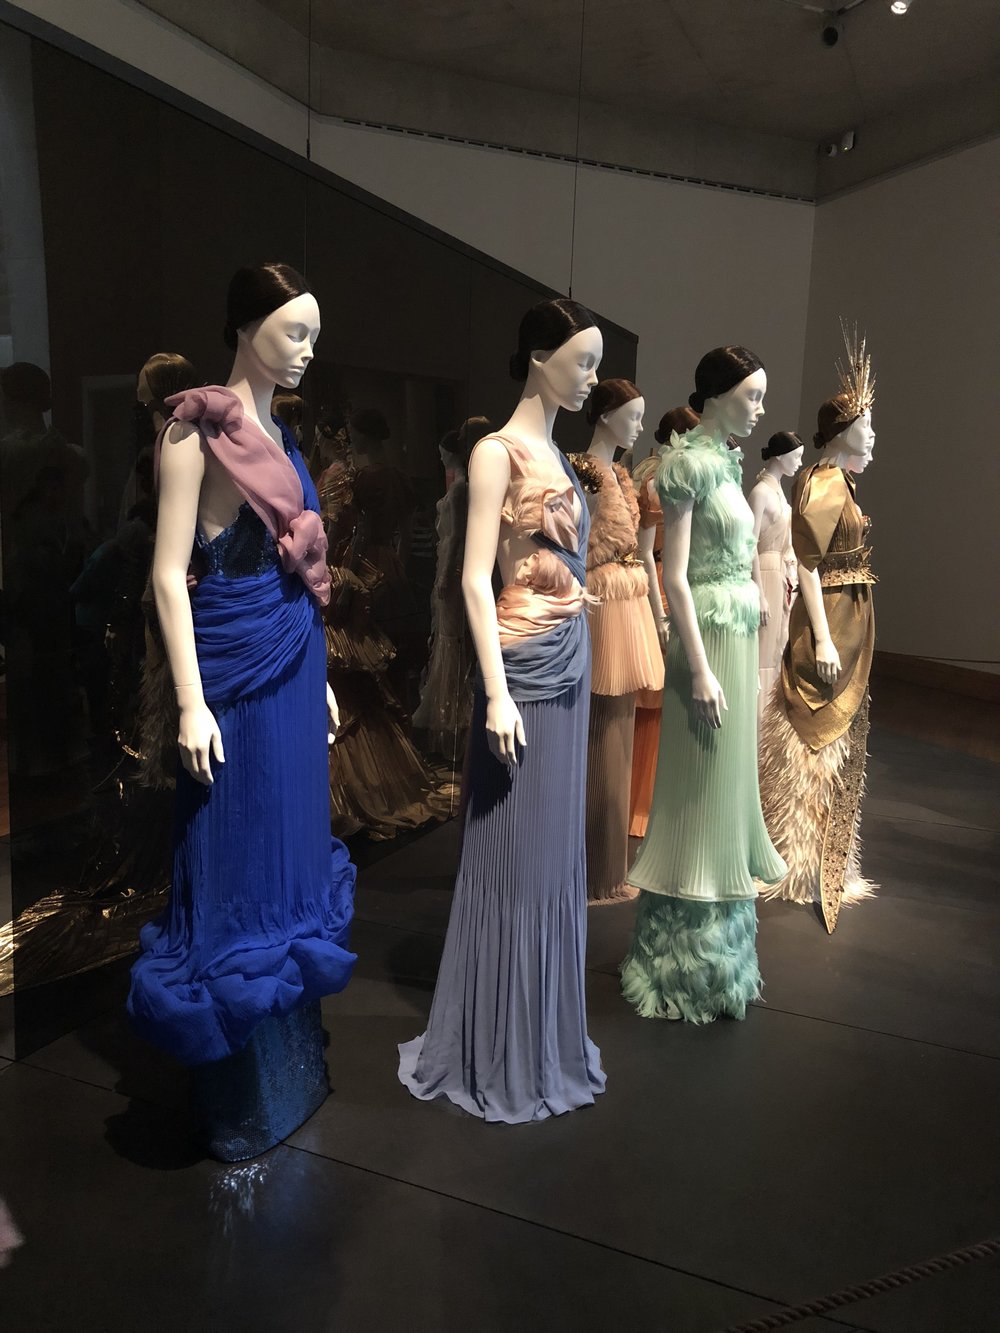 Lots of mannequins wearing dresses inside an exhibit at The Metropolitan Museum of Art